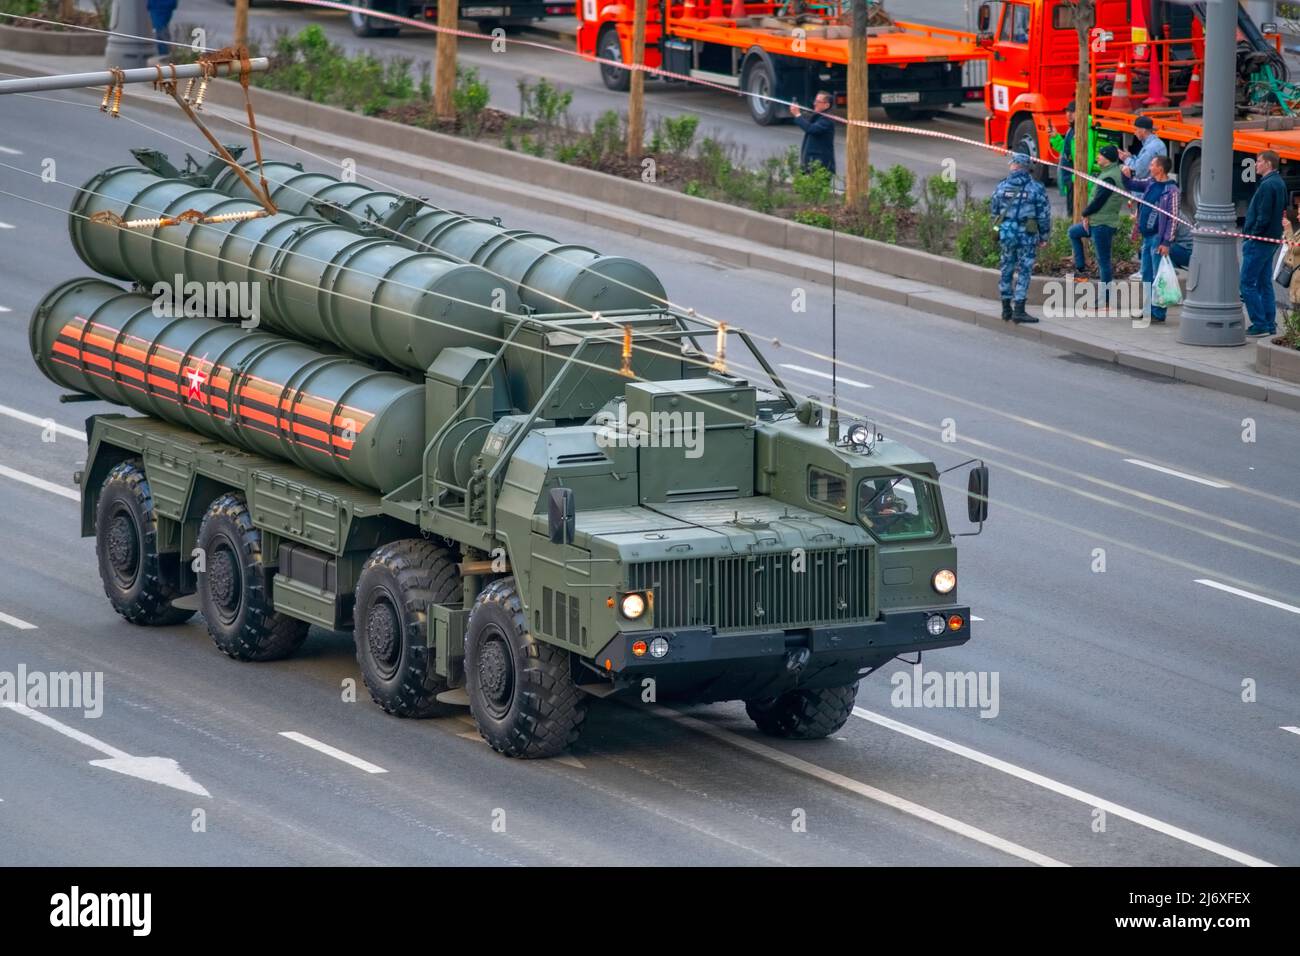 Transporter Erector Launcher vehicle of S-400 long-range air defense missile system  at Russian Victory Parade in Moscow Stock Photo